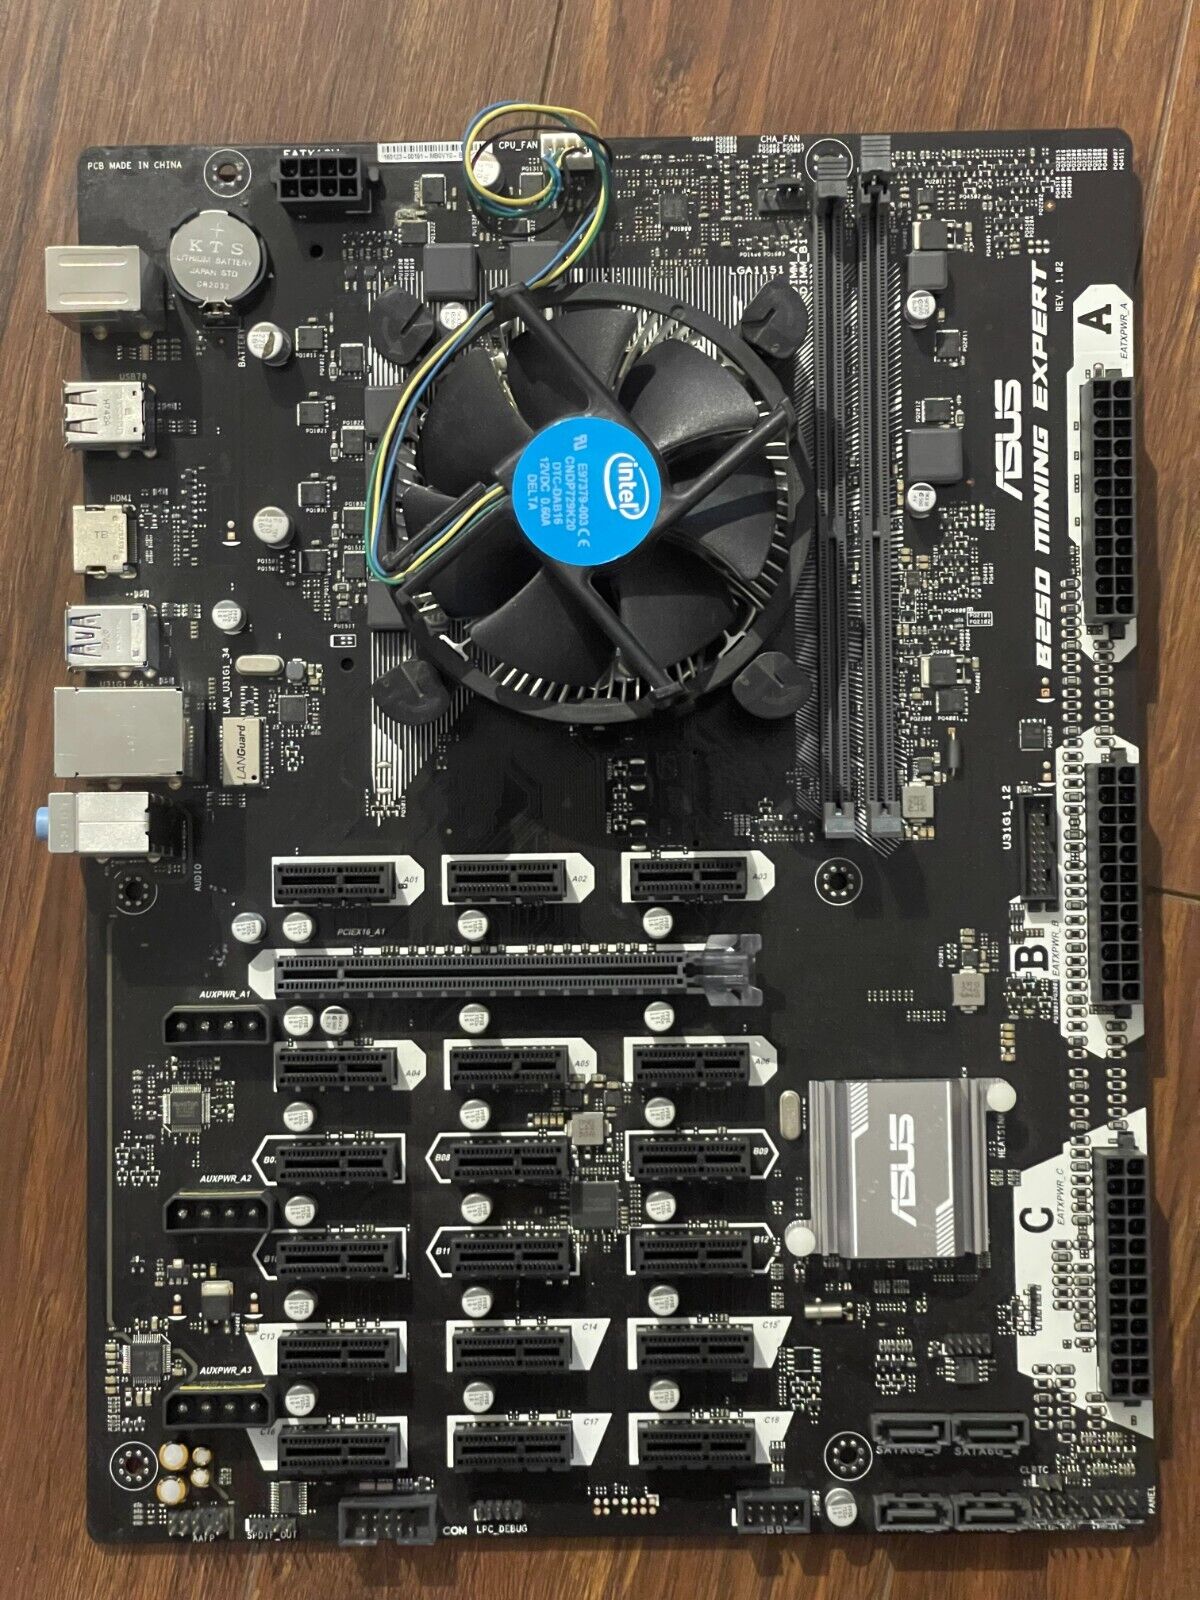 ASUS B250 Mining Expert LGA 1151 Intel Motherboard With 4 Gb 2666mhz And G3900